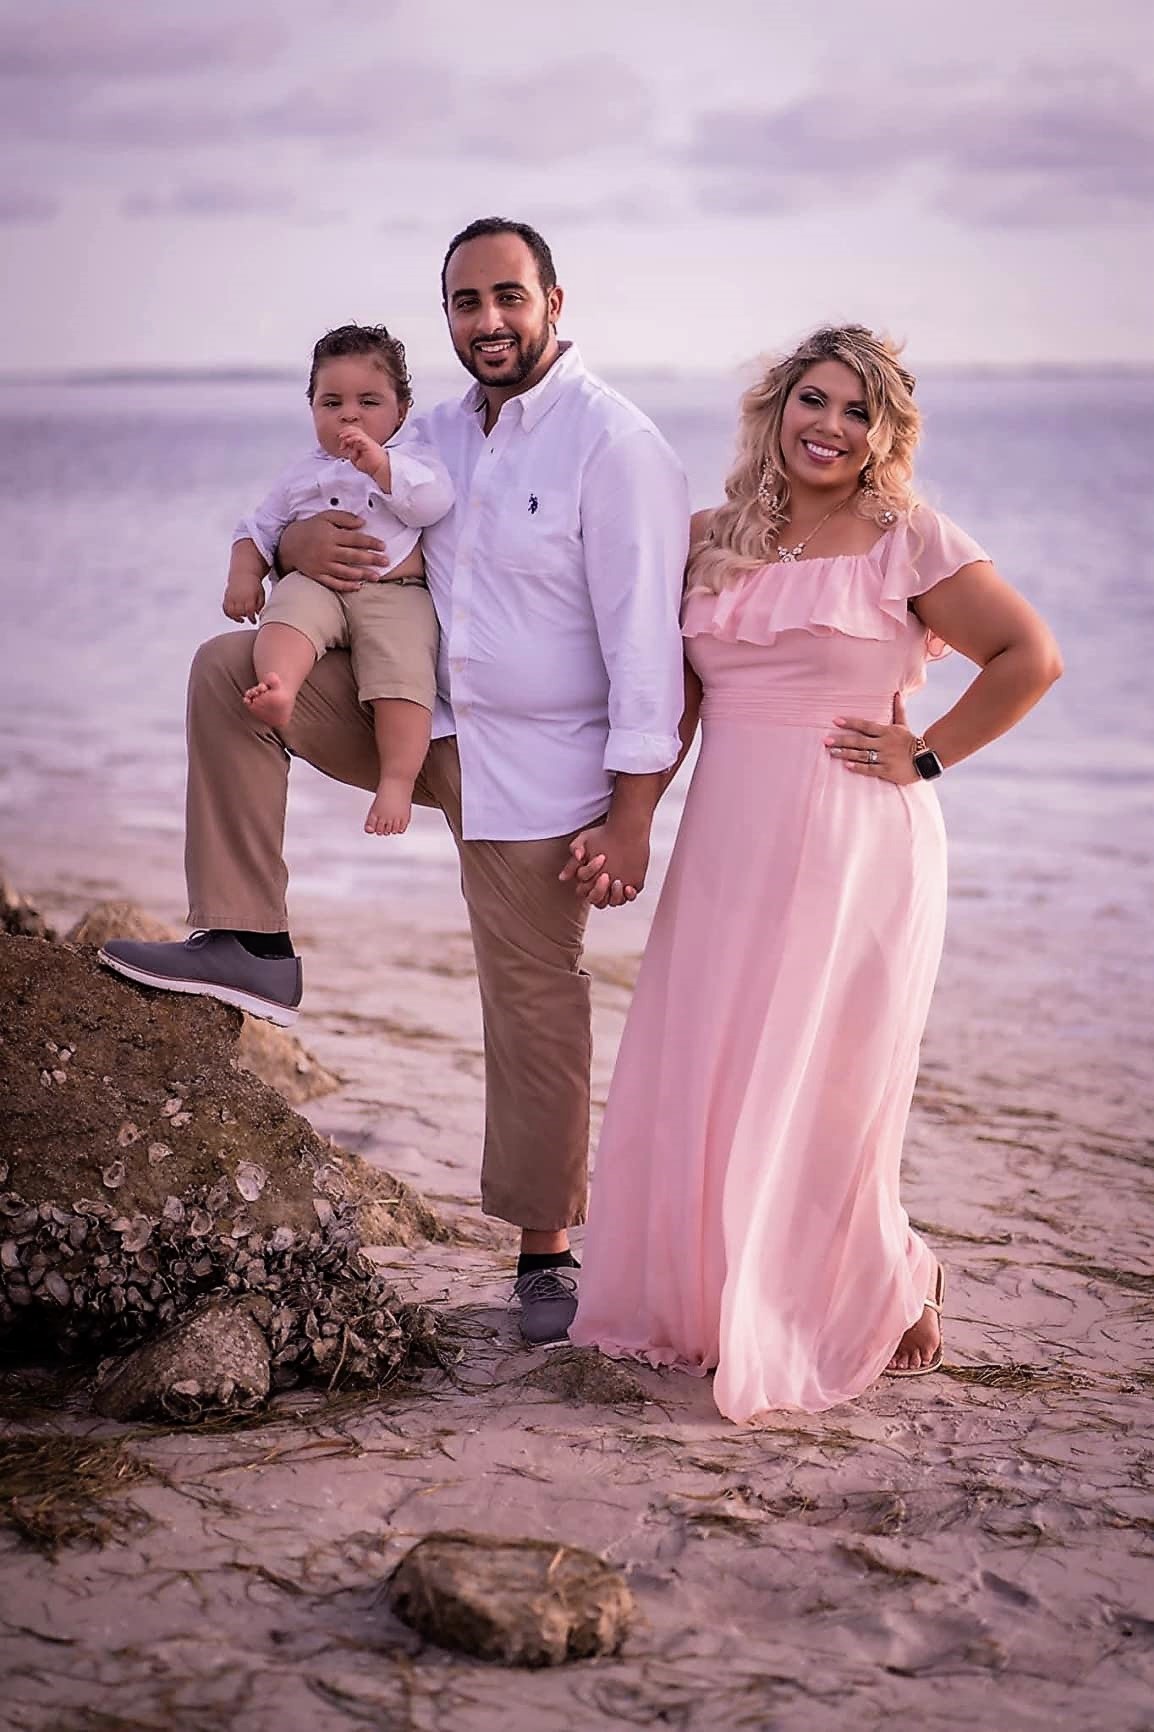 family beach photo outfits pink and khaki